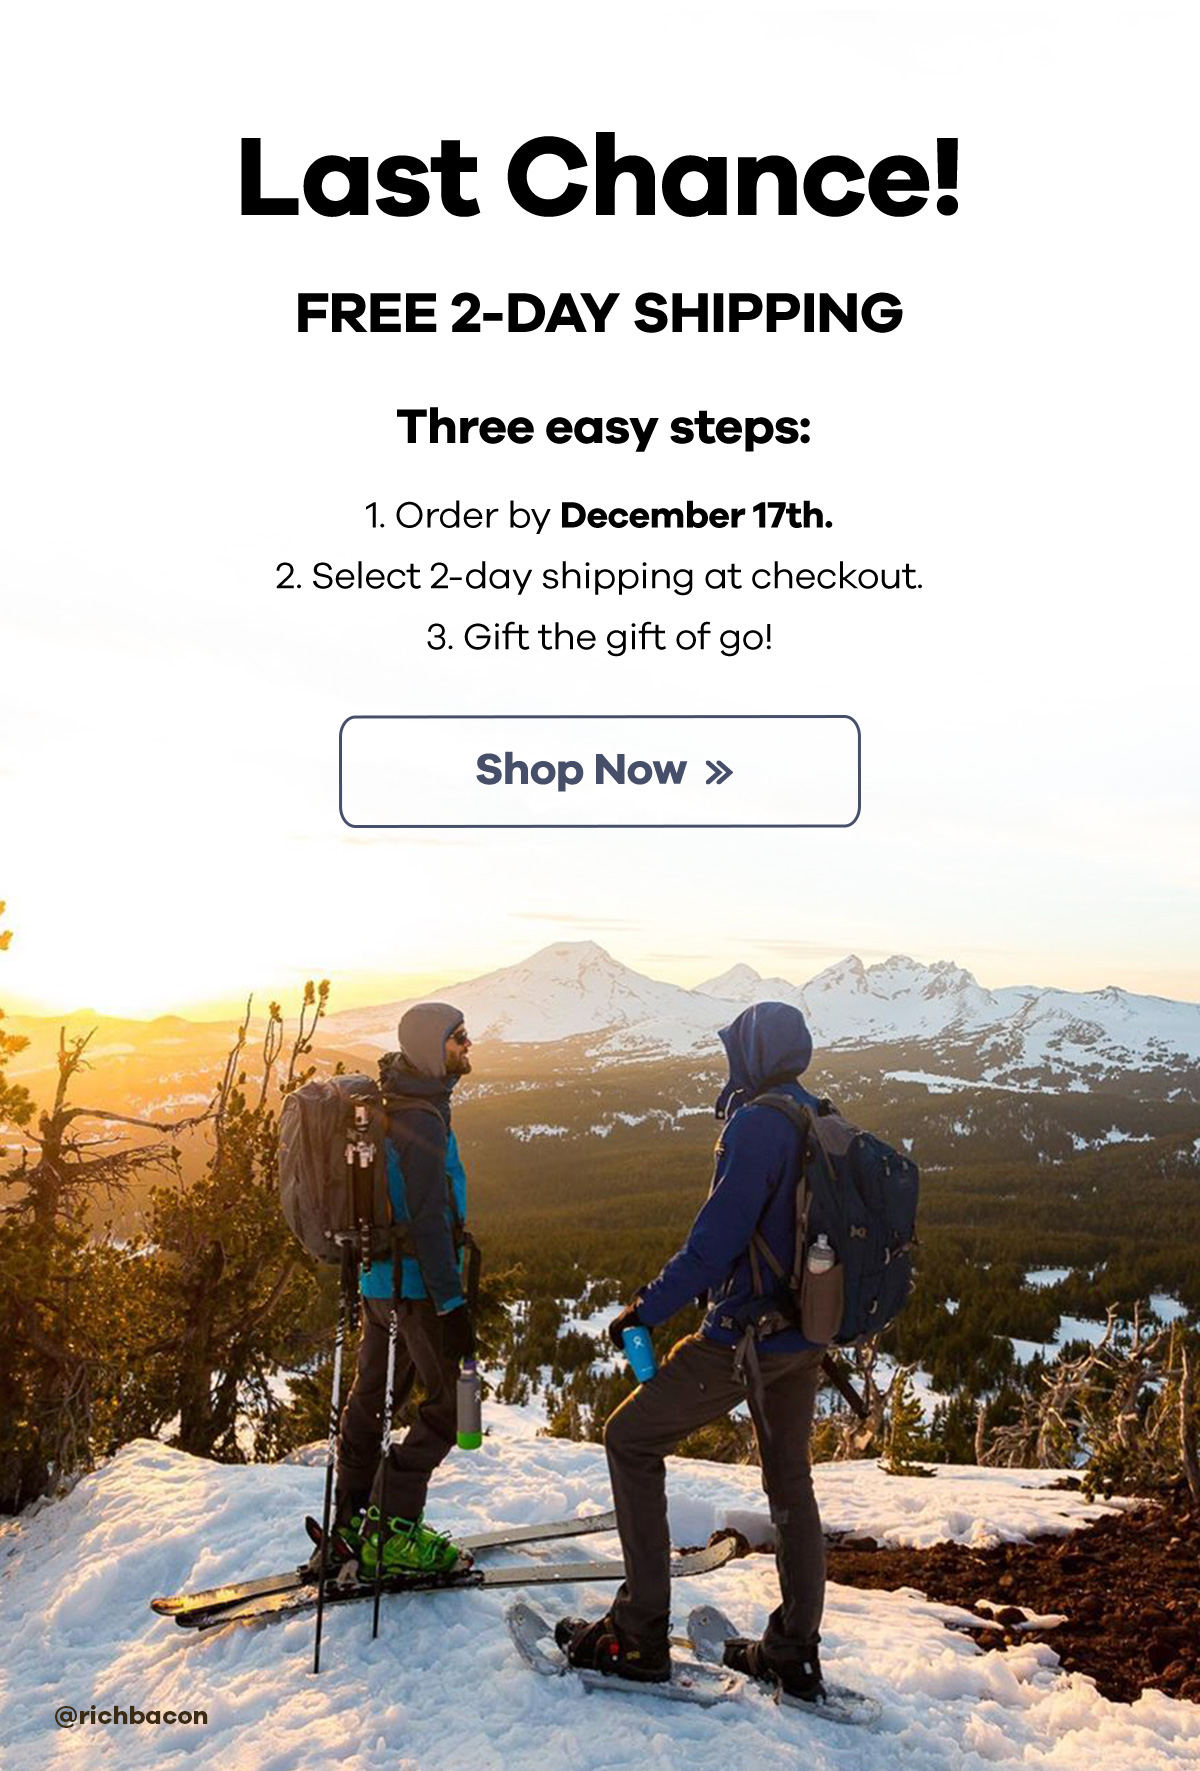 Last Chance! FREE 2-DAY SHIPPING | Three easy steps: 1. Order by December 17th. 2. Select 2-day shipping at checkout. 3. Give the gift of go! | SHOP NOW >>